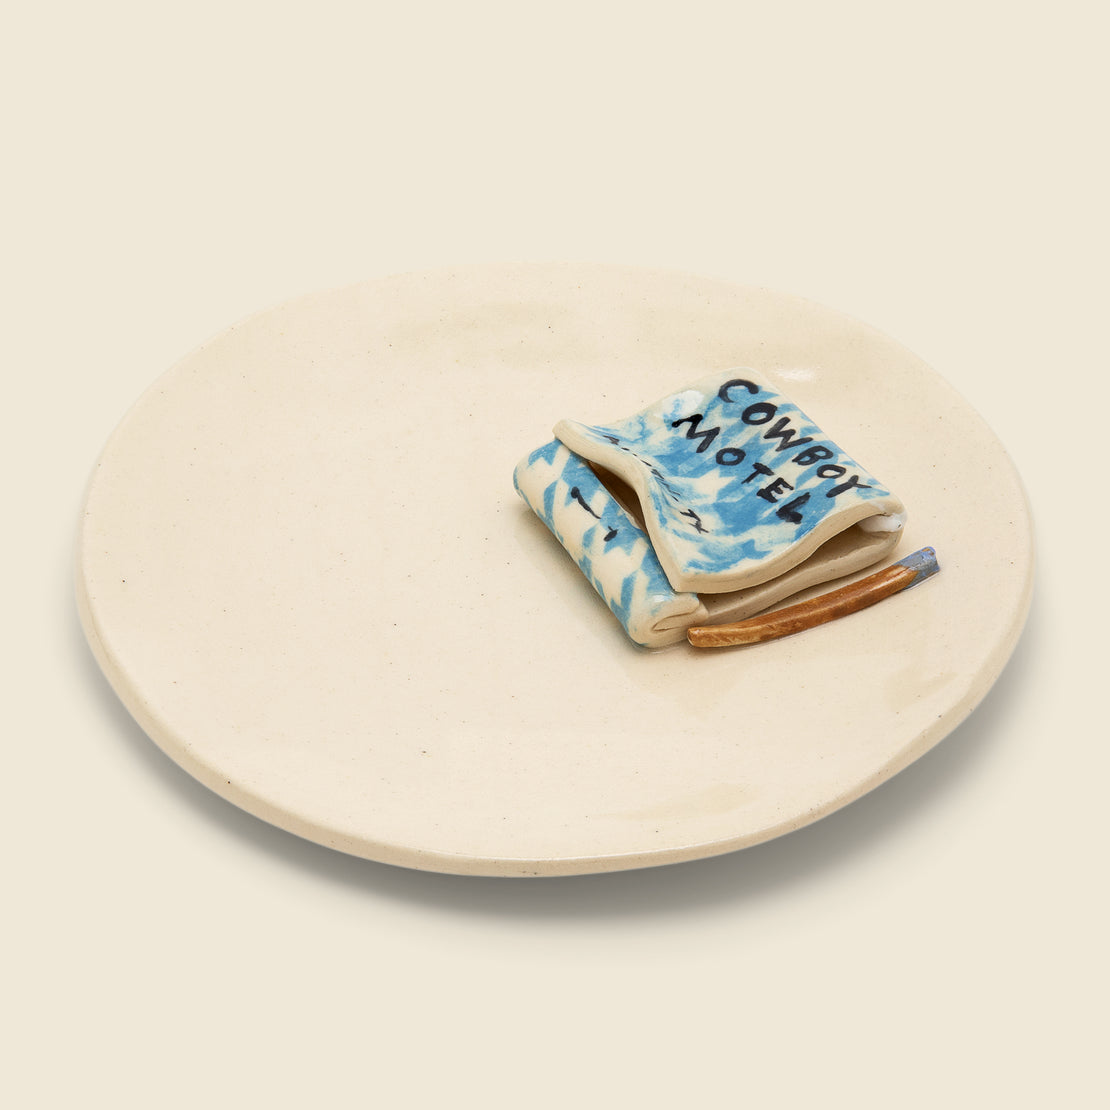 Small Plate - Cowboy Motel Matches - Home - STAG Provisions - Home - Art & Accessories - Tray